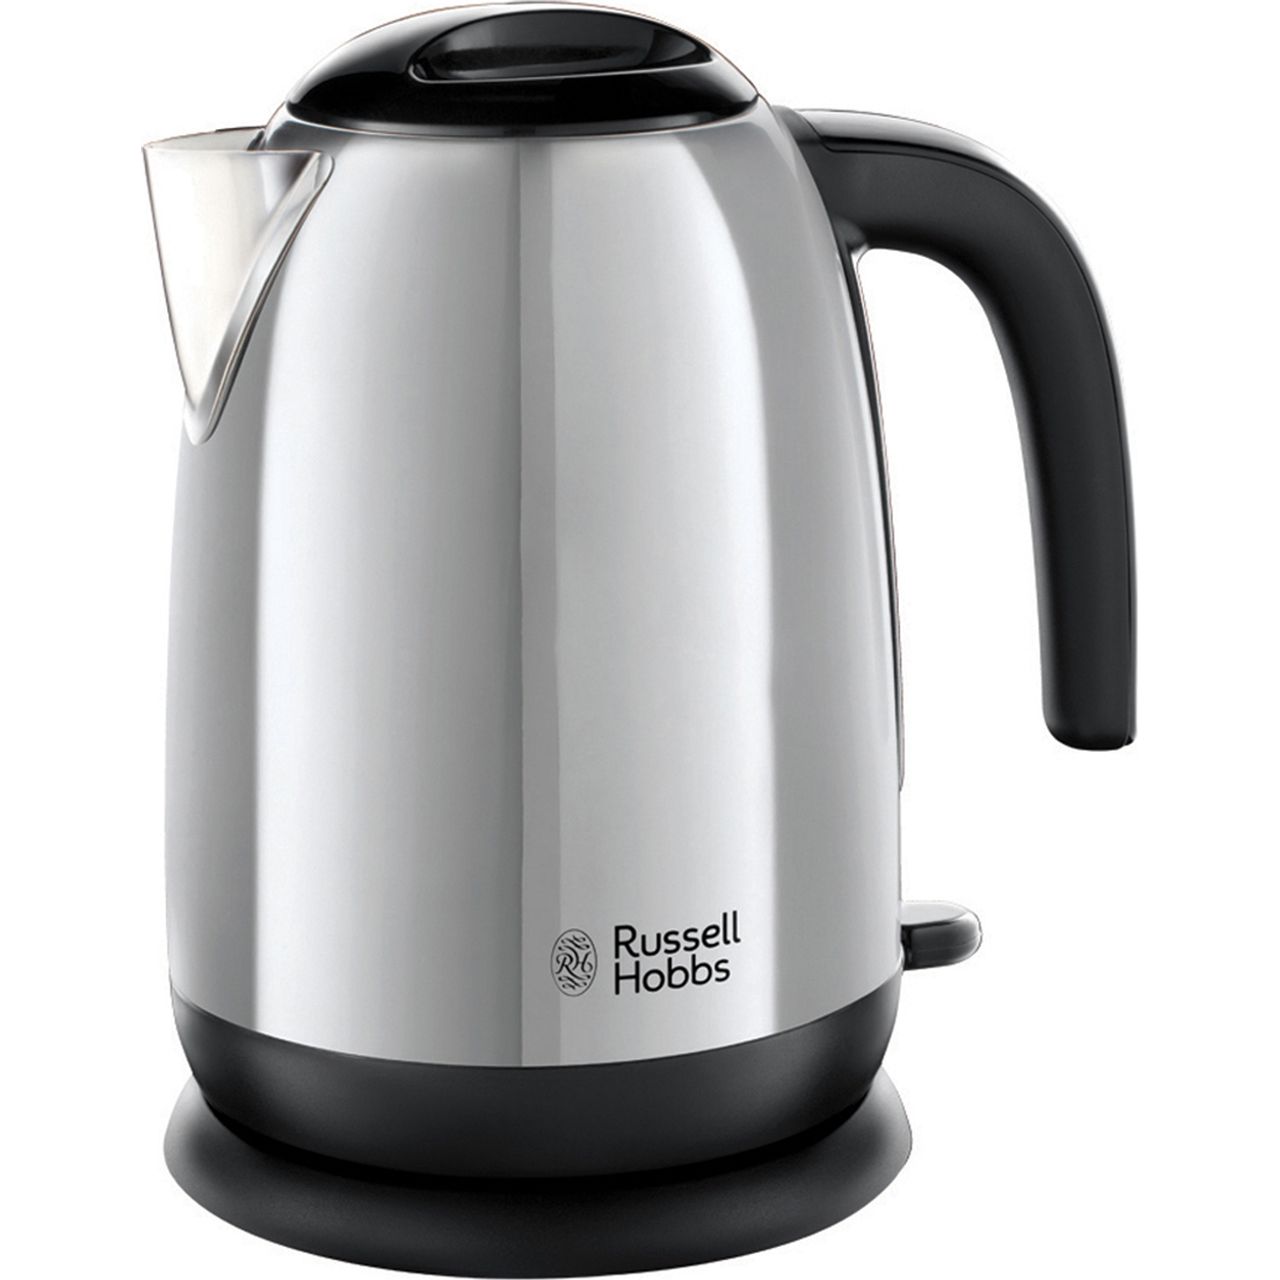 Russell Hobbs 23911 Kettle Review